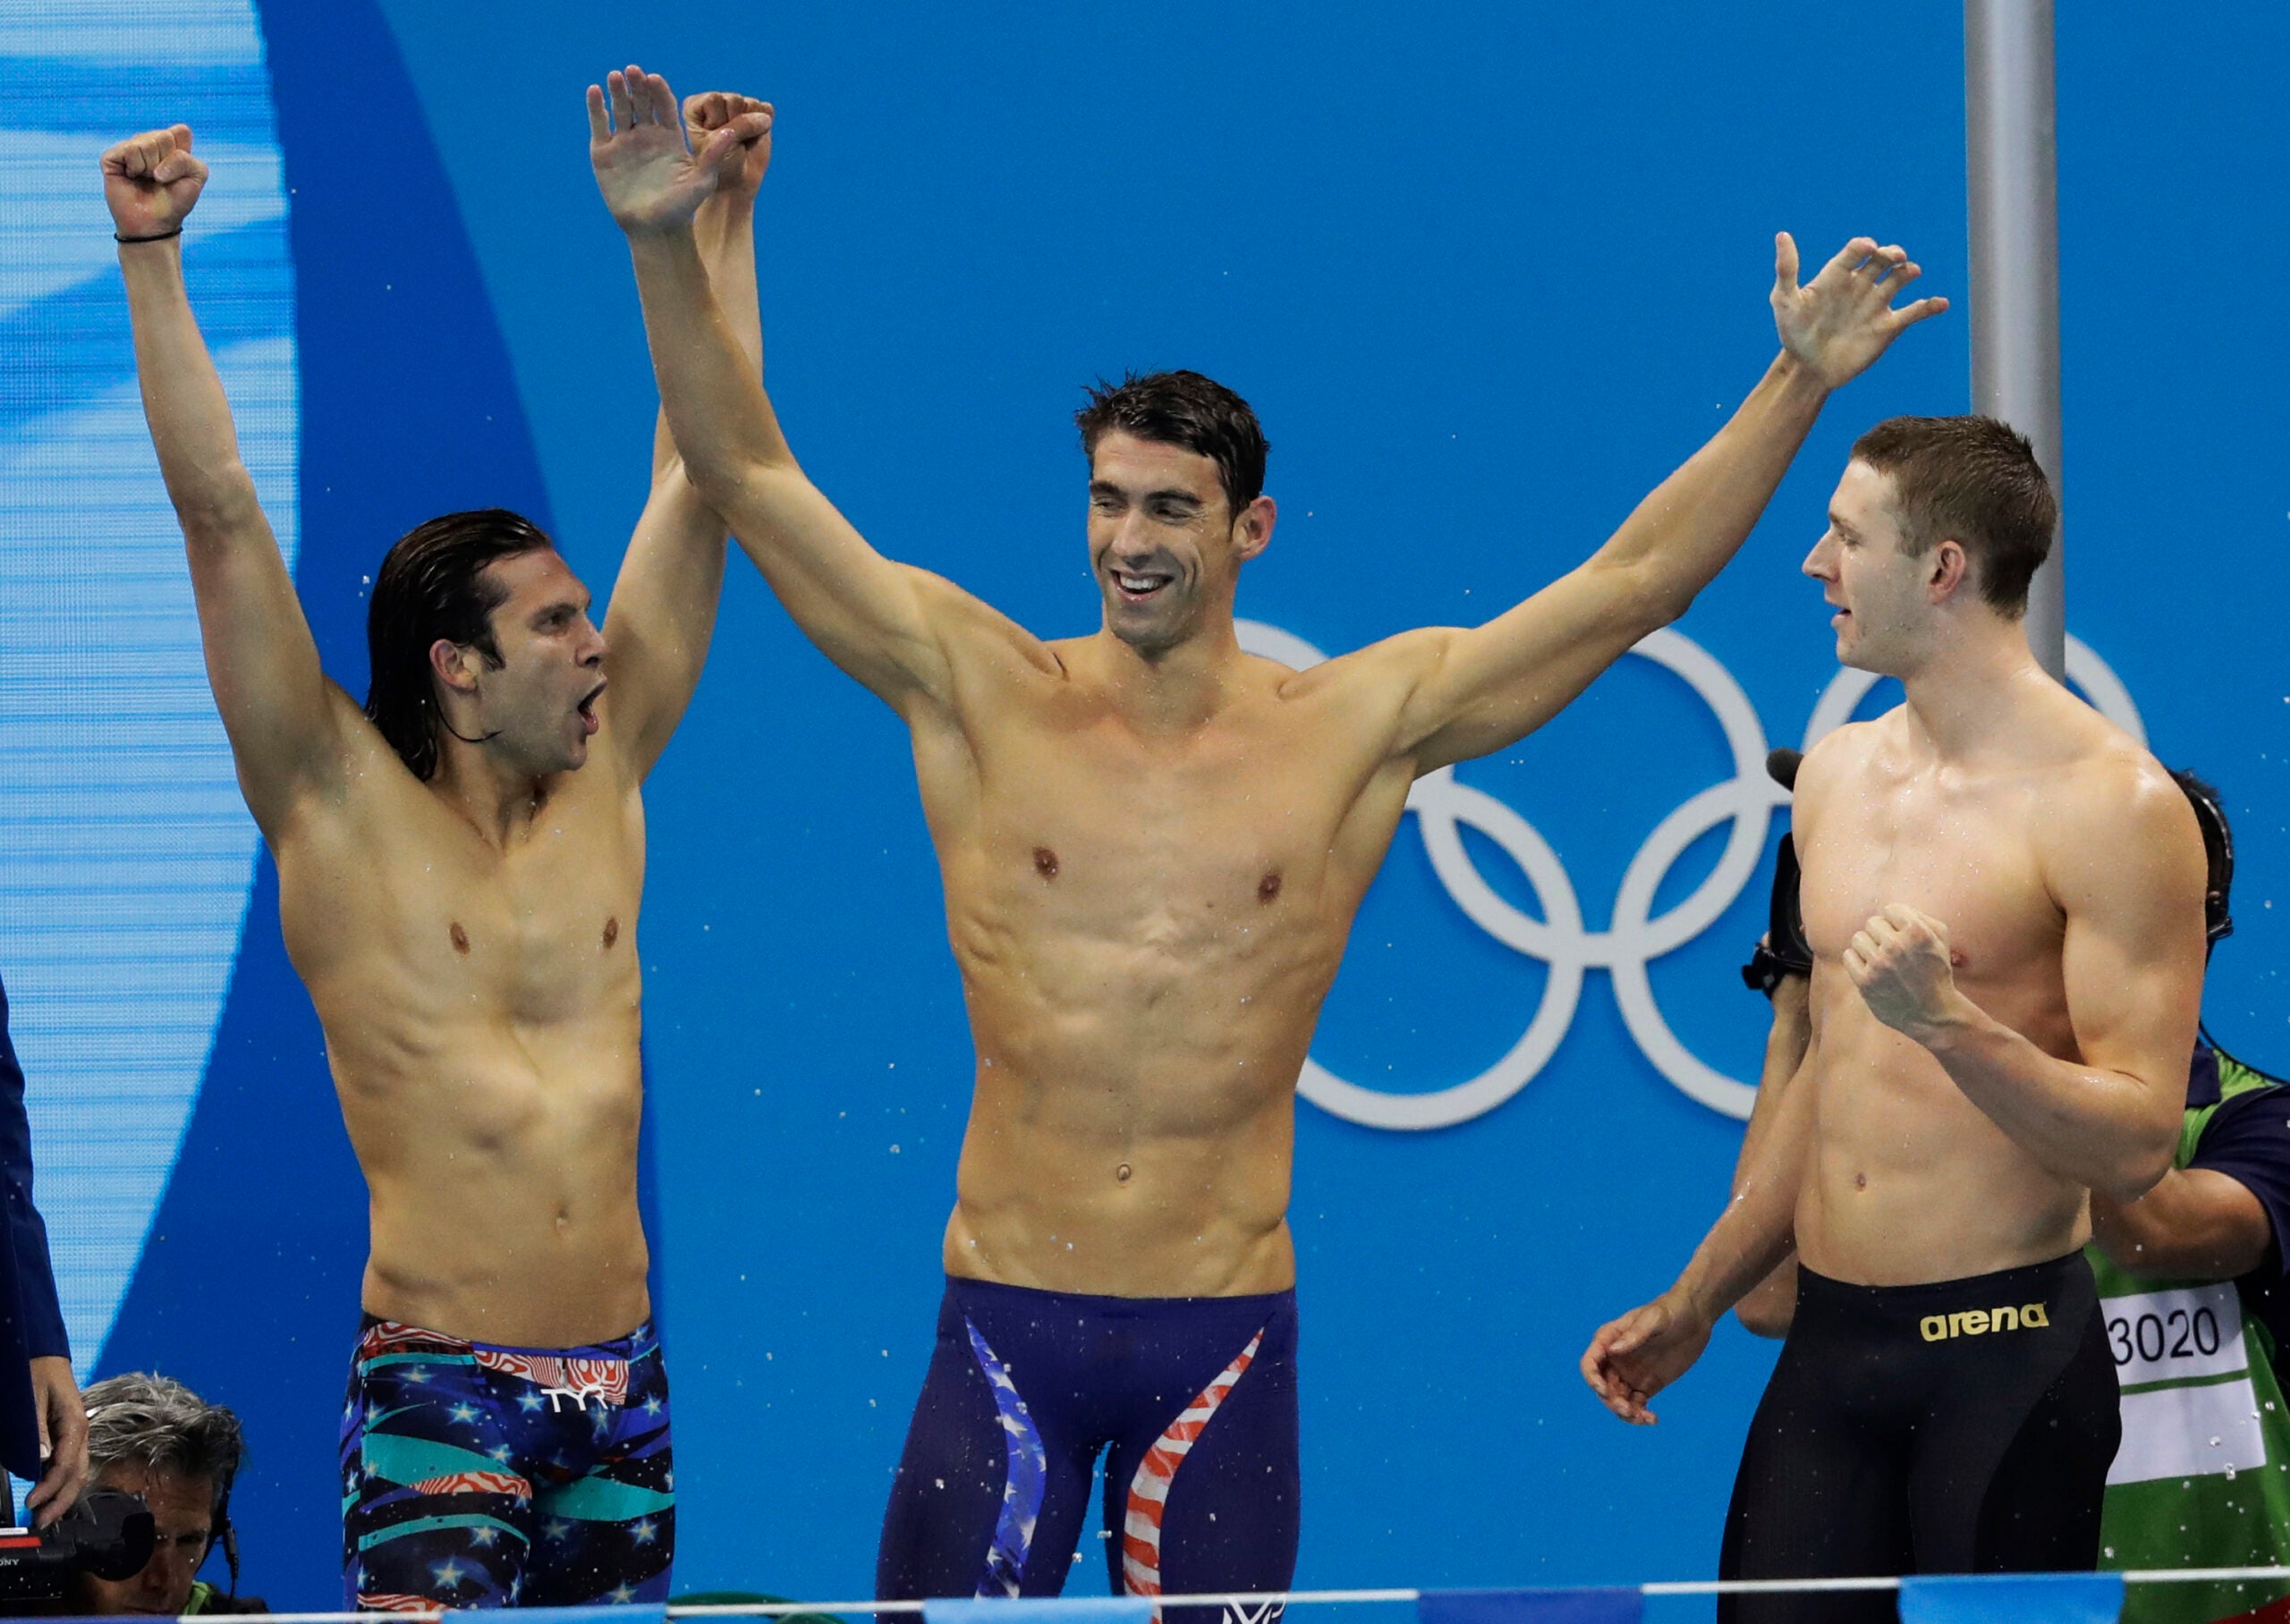 Michael Phelps wins 23rd gold medal, but says it is the last